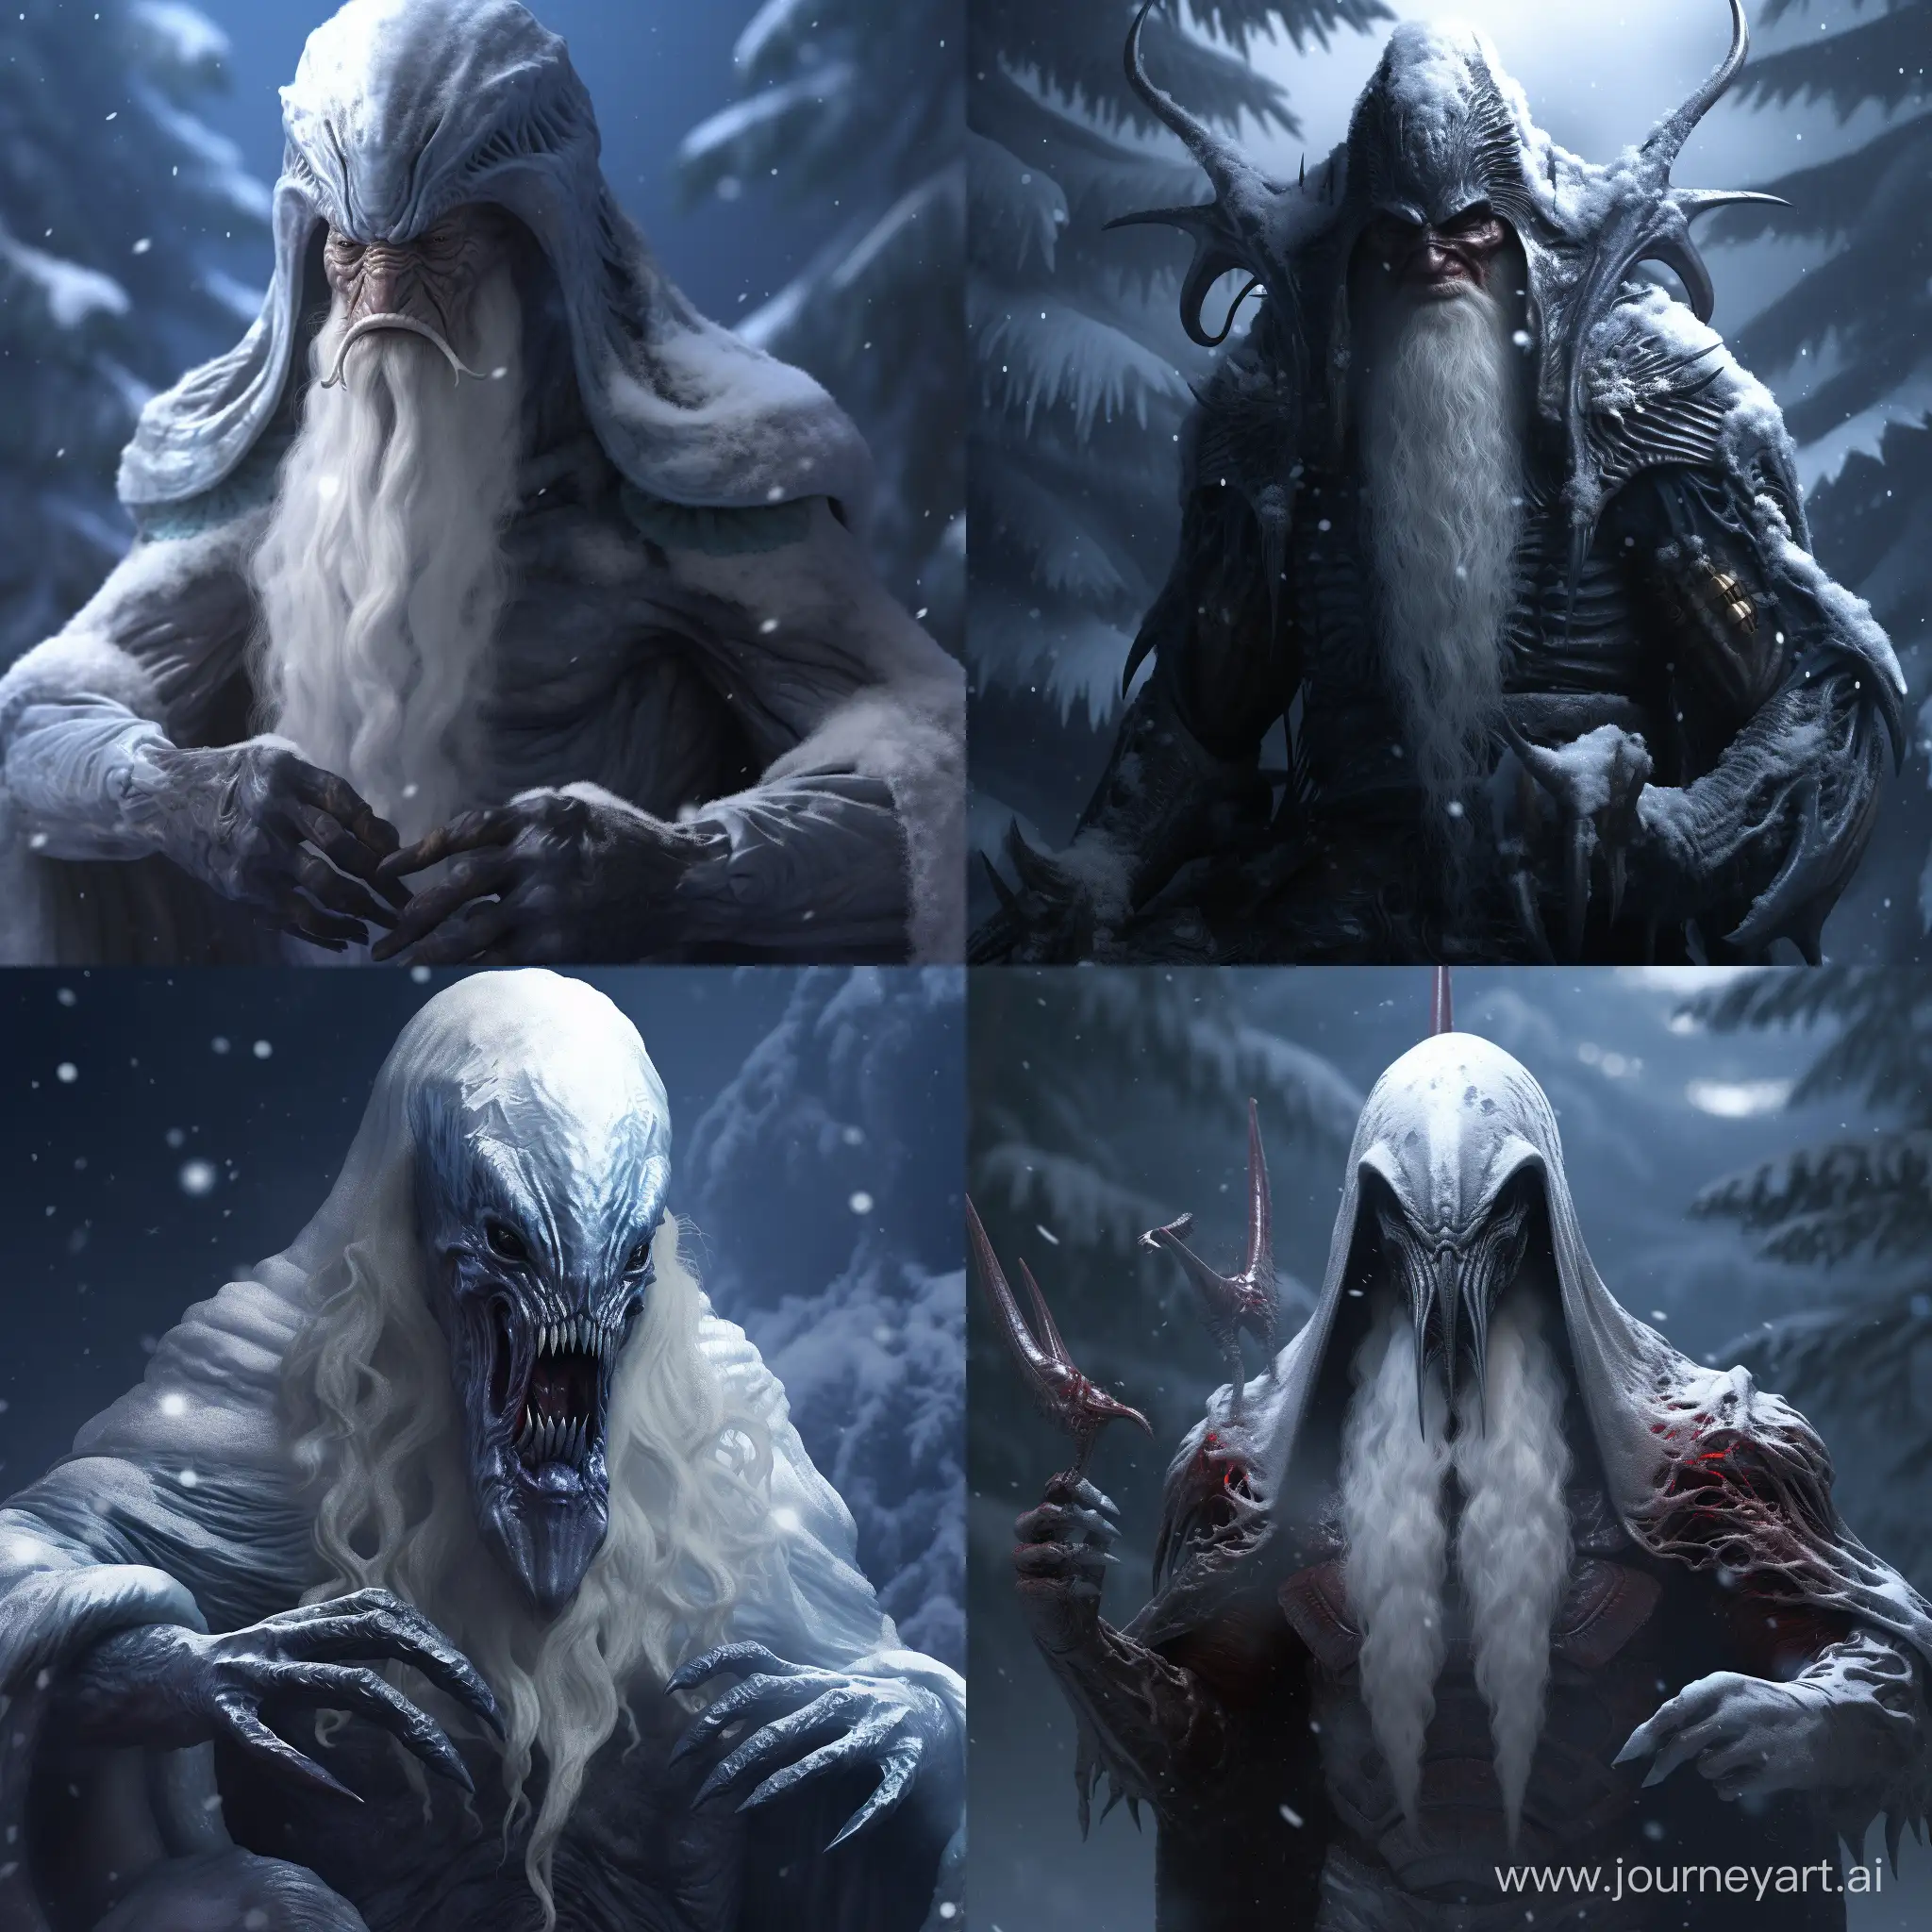 Xenomorph-Grandfather-Frost-Art-Intriguing-Fusion-of-Extraterrestrial-and-Folklore